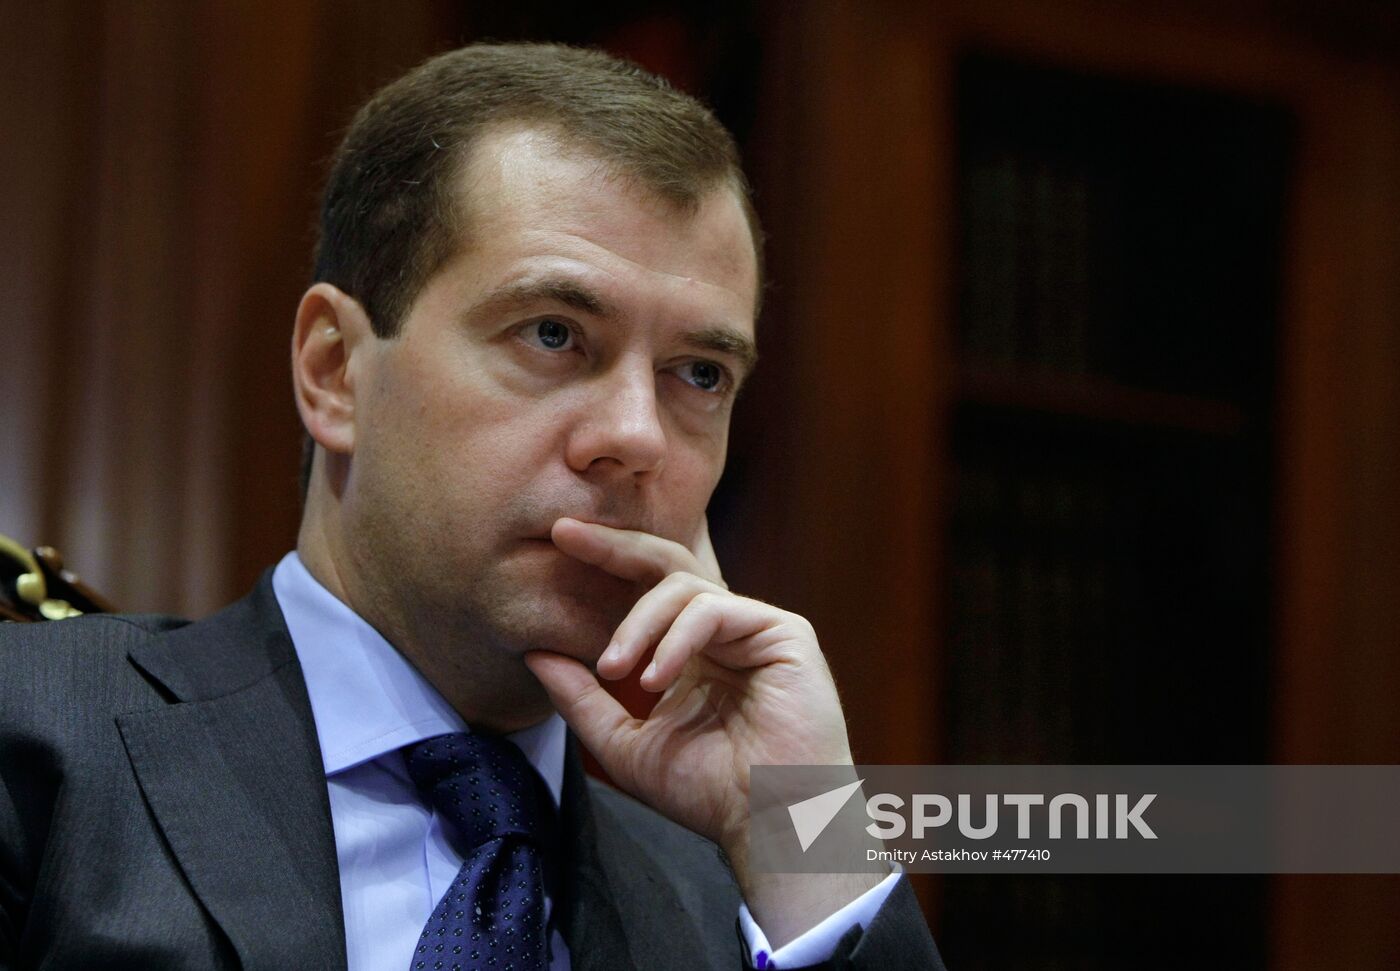 Dmitry Medvedev meets with Education and Science Minister